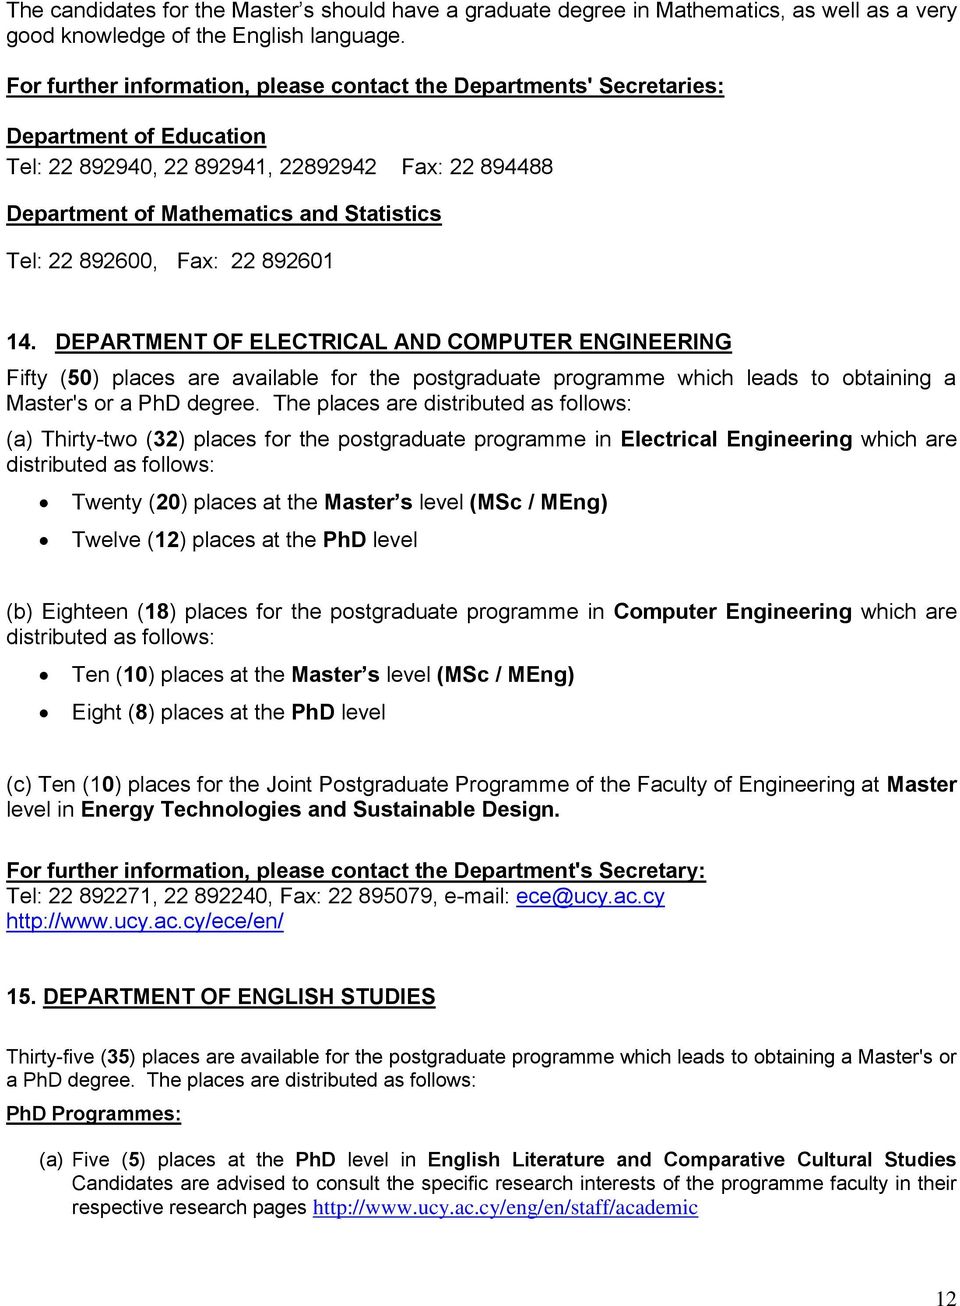 892600, Fax: 22 892601 14. DEPARTMENT OF ELECTRICAL AND COMPUTER ENGINEERING Fifty (50) places are available for the postgraduate programme which leads to obtaining a Master's or a PhD degree.